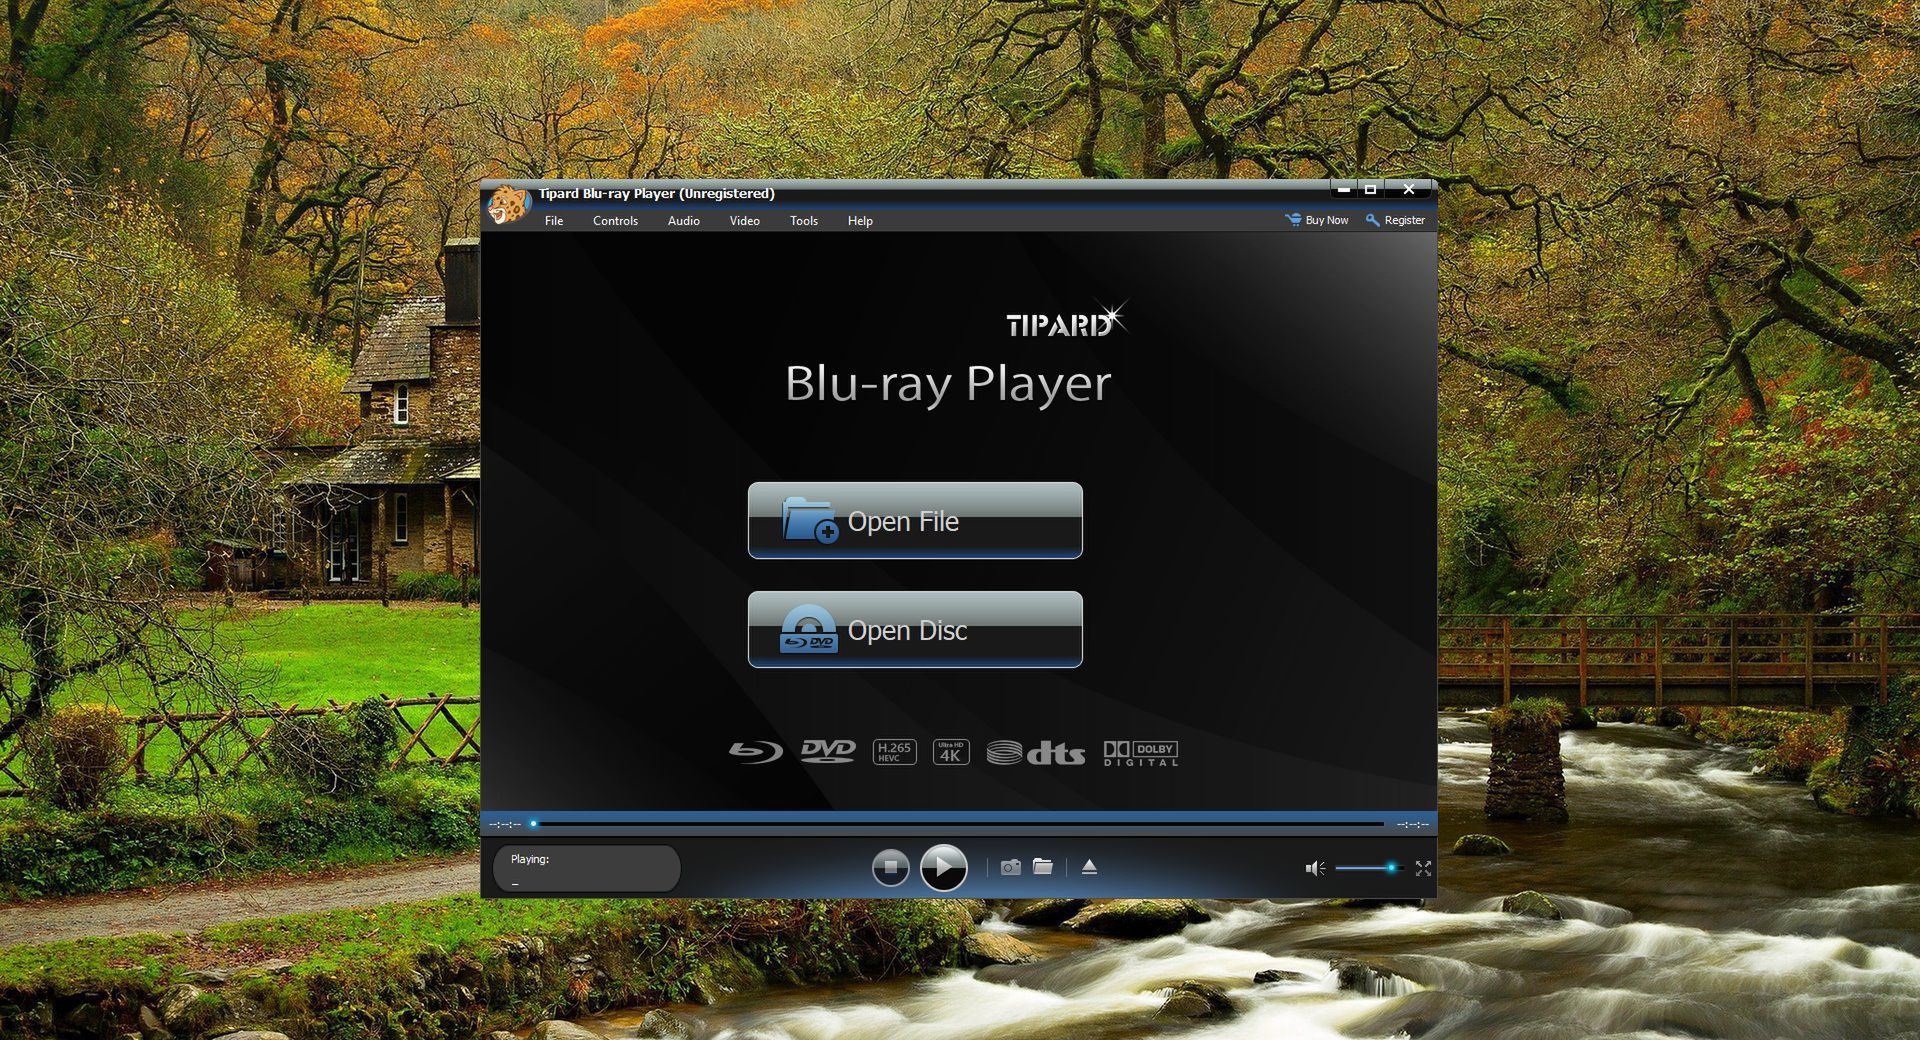 Tipard Blu-ray Player 6.3.36 instal the new version for ipod